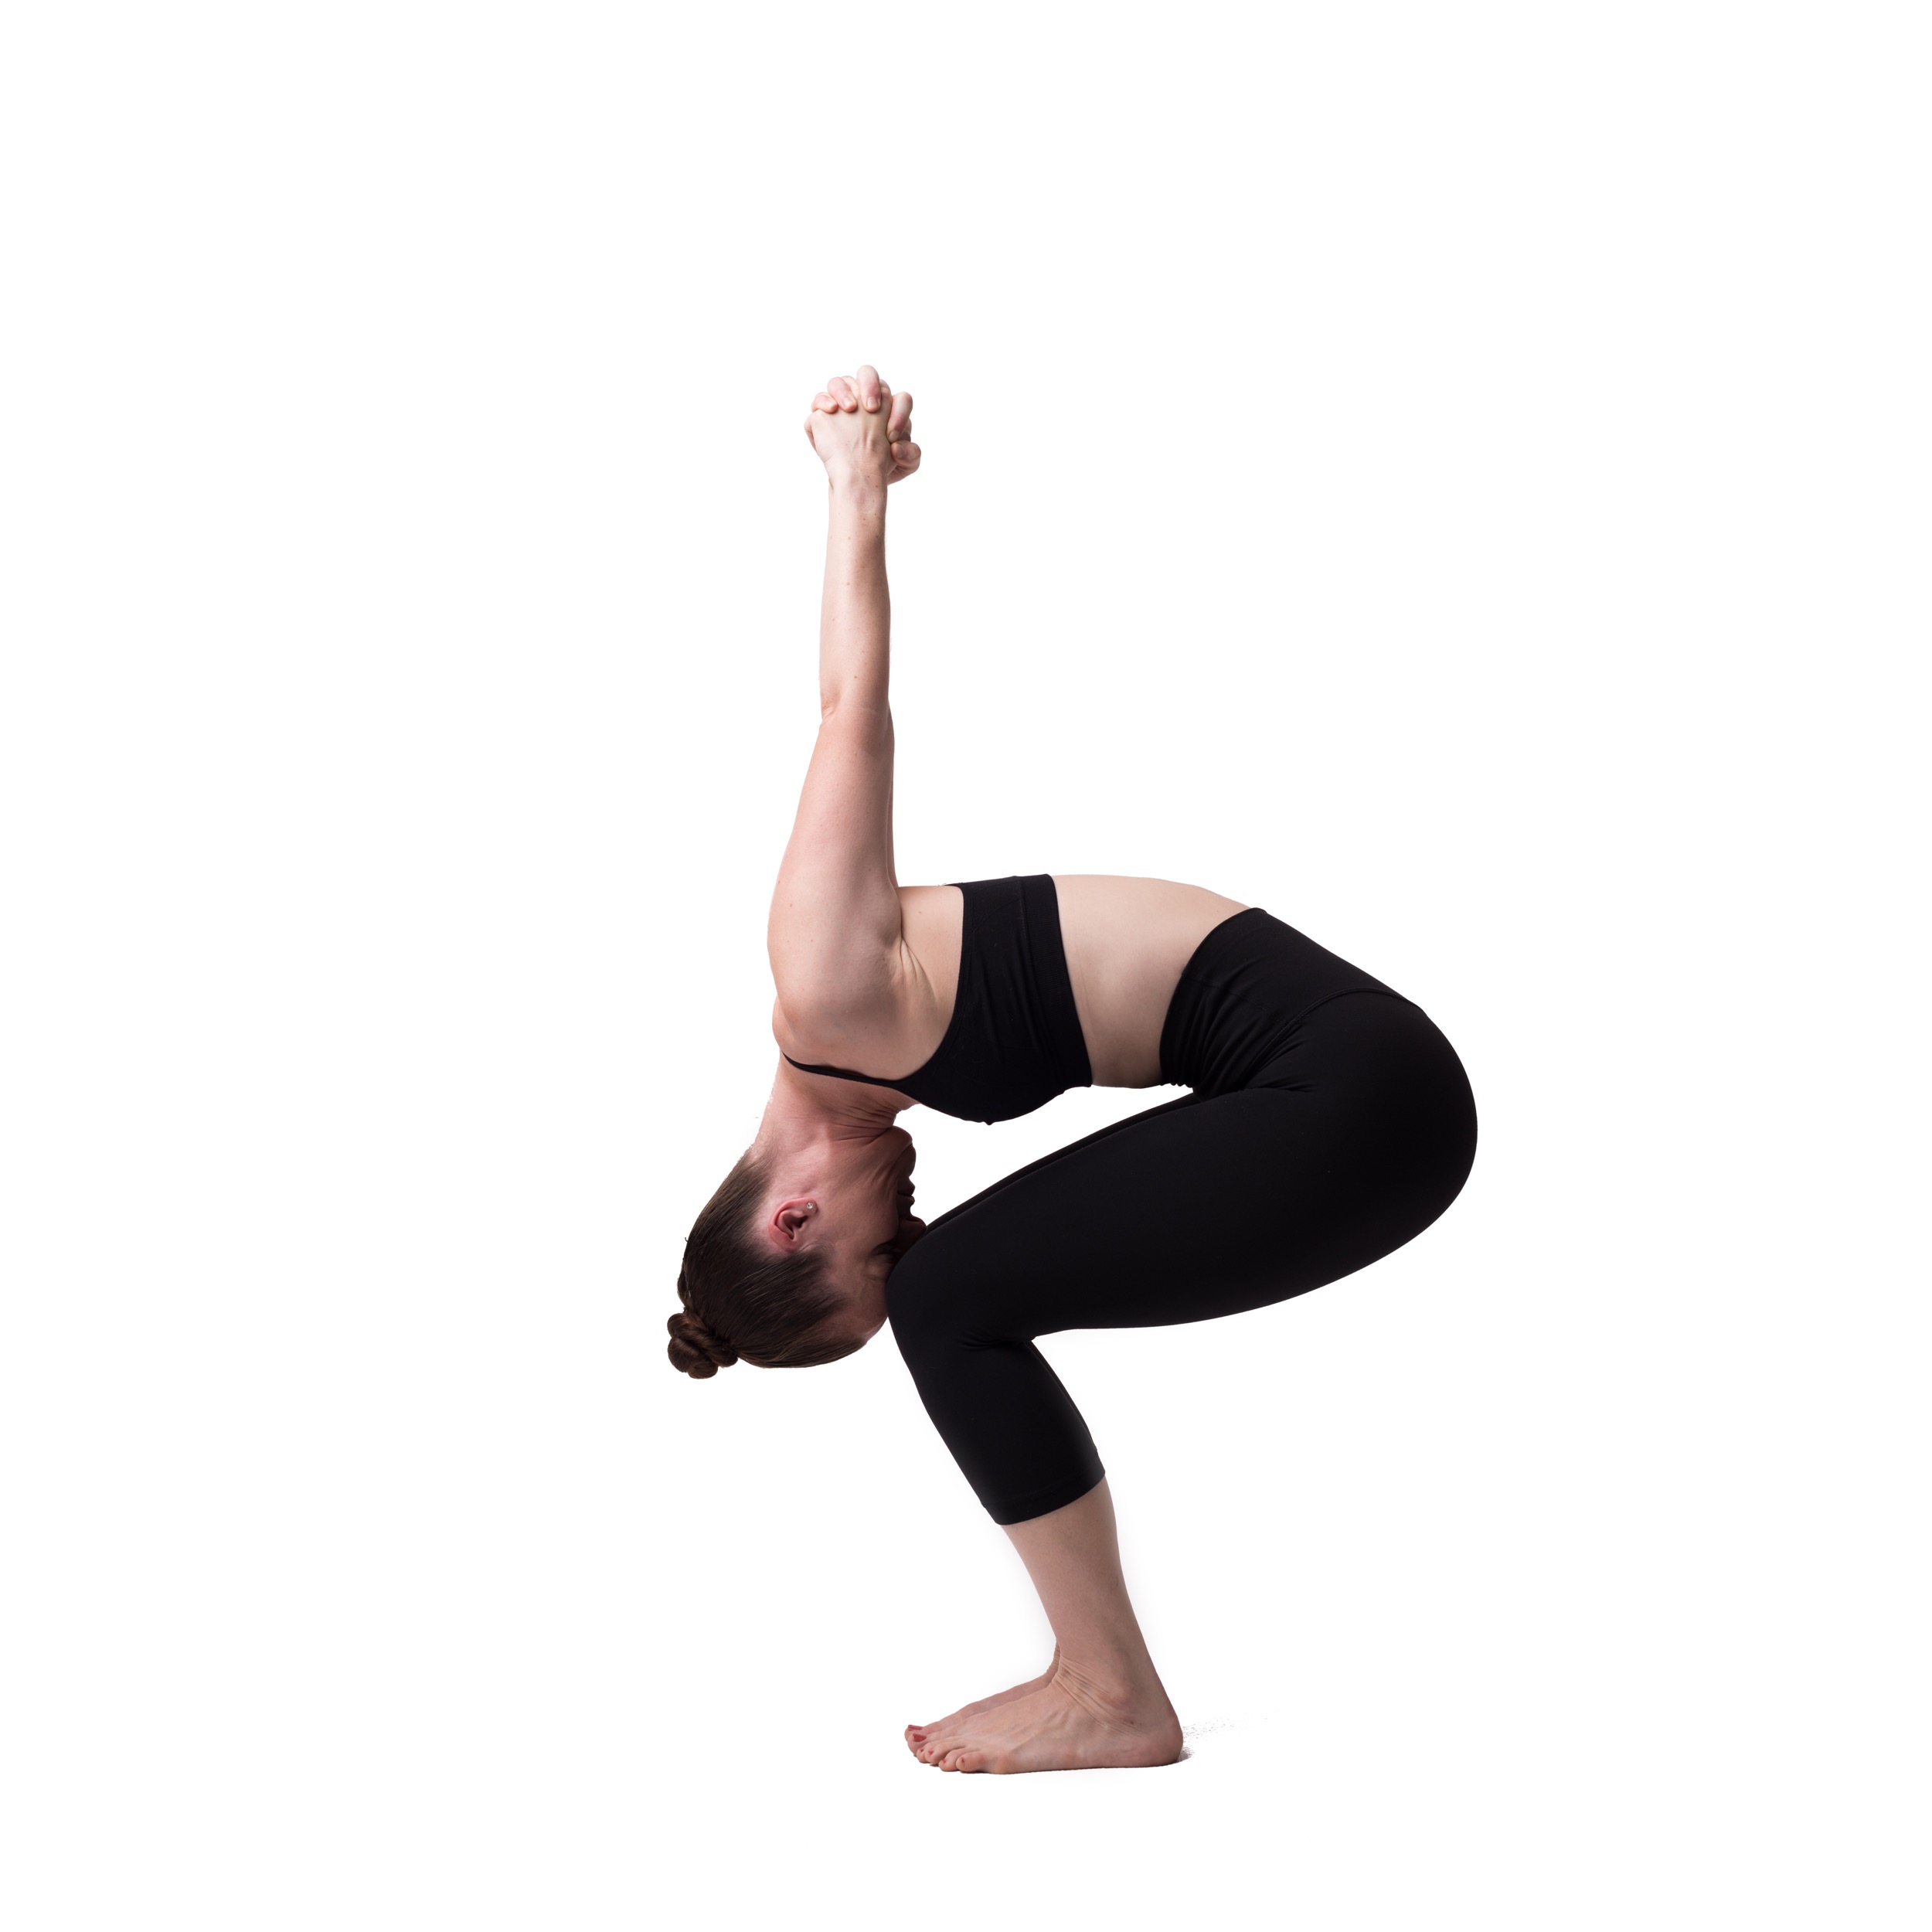 Maha Yoga » Pose of the Week: Power Pose w/ Hands Bound